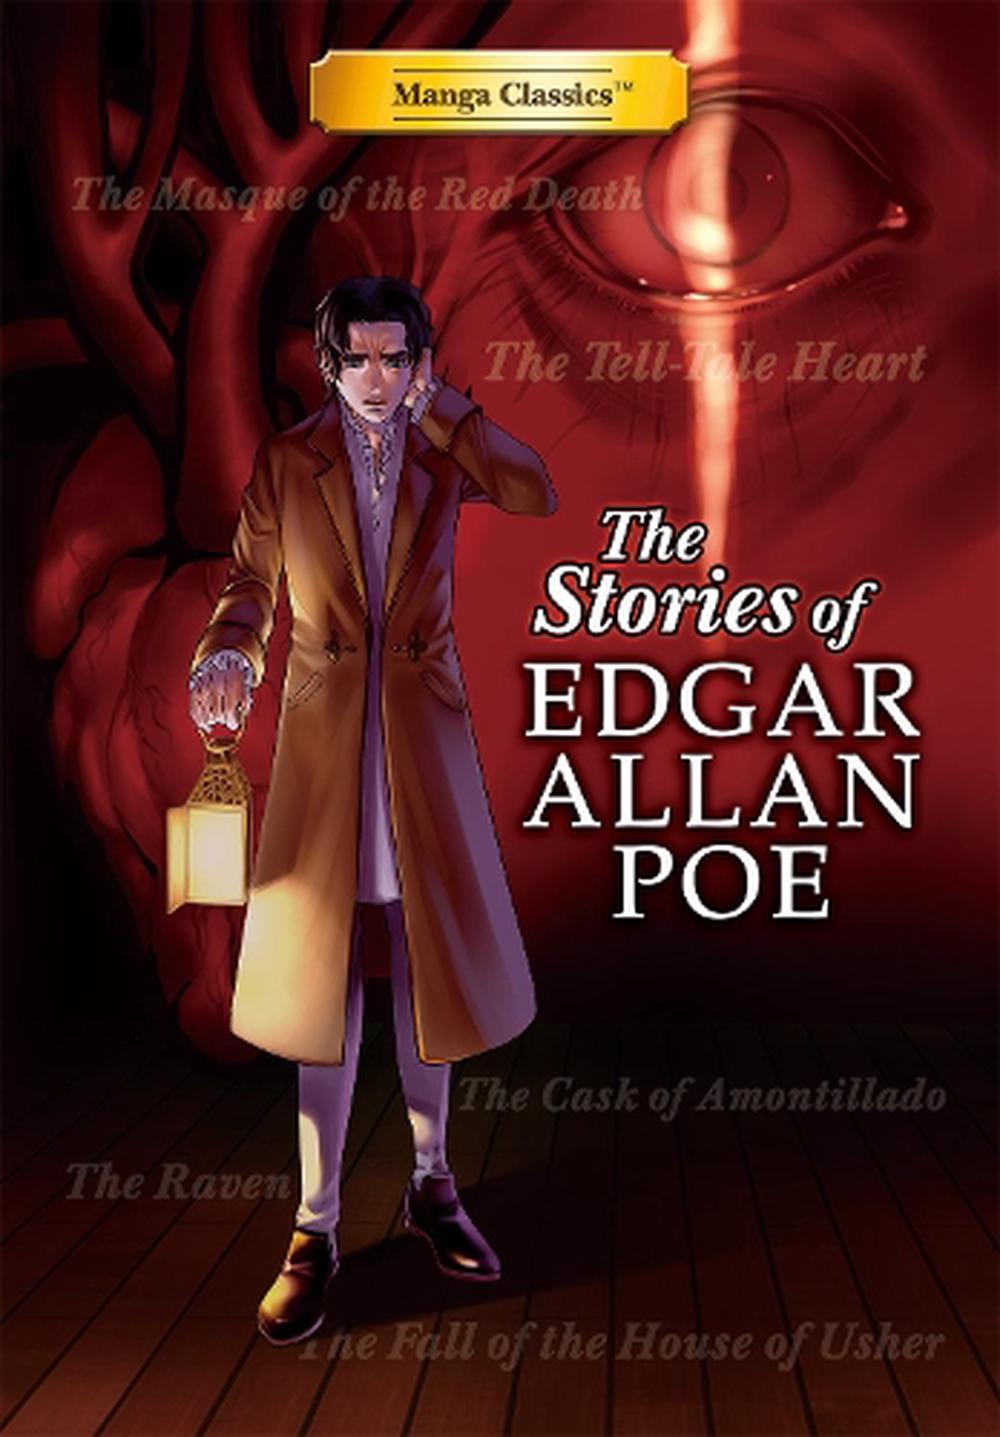 the complete stories of edgar allan poe